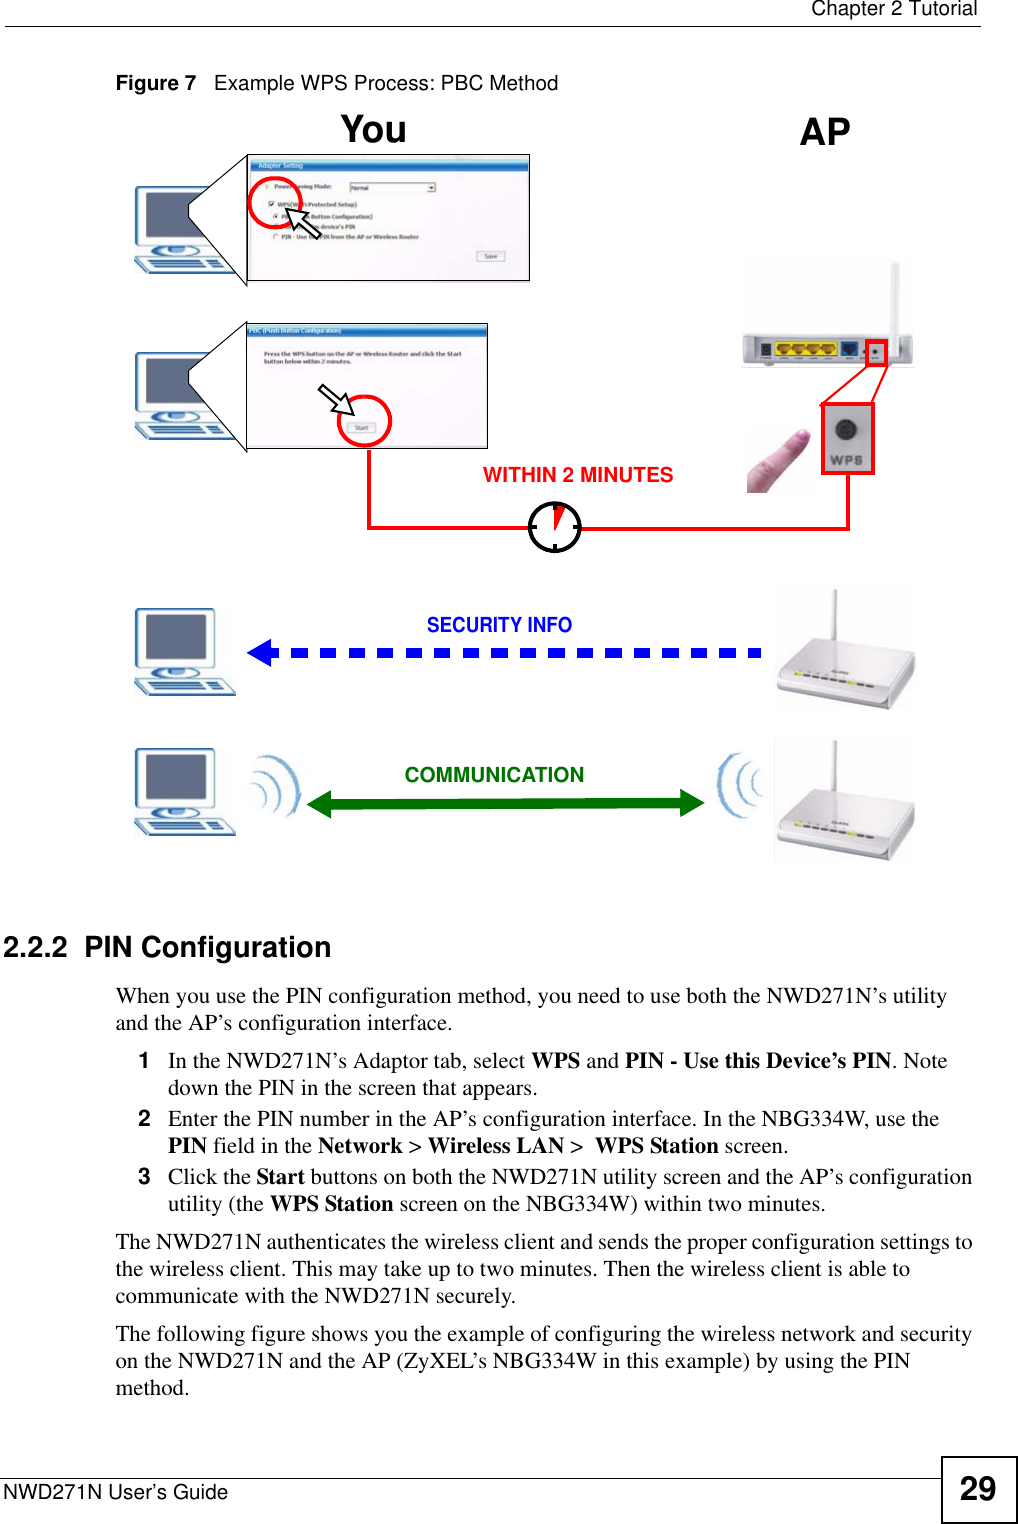  Chapter 2 TutorialNWD271N User’s Guide 29Figure 7   Example WPS Process: PBC Method2.2.2  PIN ConfigurationWhen you use the PIN configuration method, you need to use both the NWD271N’s utility and the AP’s configuration interface.1In the NWD271N’s Adaptor tab, select WPS and PIN - Use this Device’s PIN. Note down the PIN in the screen that appears. 2Enter the PIN number in the AP’s configuration interface. In the NBG334W, use the PIN field in the Network &gt; Wireless LAN &gt;  WPS Station screen. 3Click the Start buttons on both the NWD271N utility screen and the AP’s configuration utility (the WPS Station screen on the NBG334W) within two minutes. The NWD271N authenticates the wireless client and sends the proper configuration settings to the wireless client. This may take up to two minutes. Then the wireless client is able to communicate with the NWD271N securely. The following figure shows you the example of configuring the wireless network and security on the NWD271N and the AP (ZyXEL’s NBG334W in this example) by using the PIN method. You APSECURITY INFOCOMMUNICATIONWITHIN 2 MINUTES